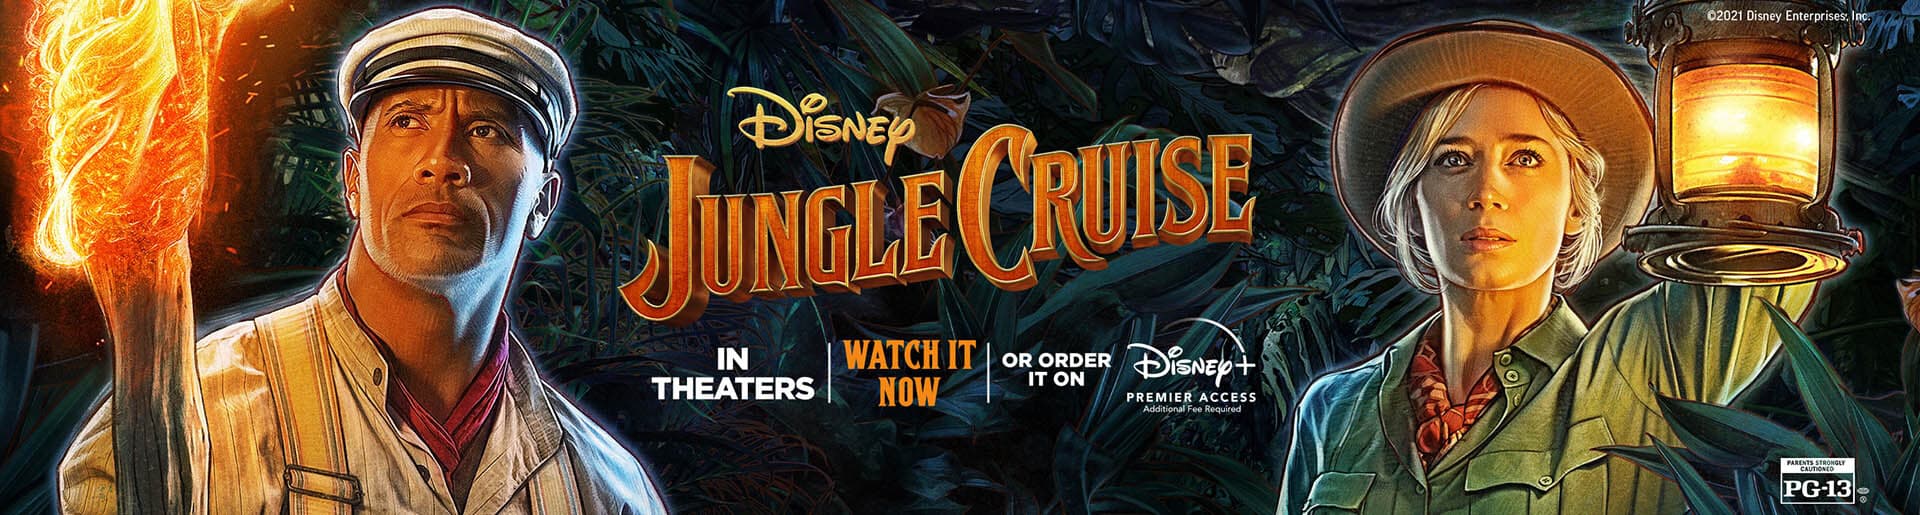 MEET THE CAST: DISNEY'S JUNGLE CRUISE CAST WITH DWAYNE JOHNSON AND EMILY BLUNT